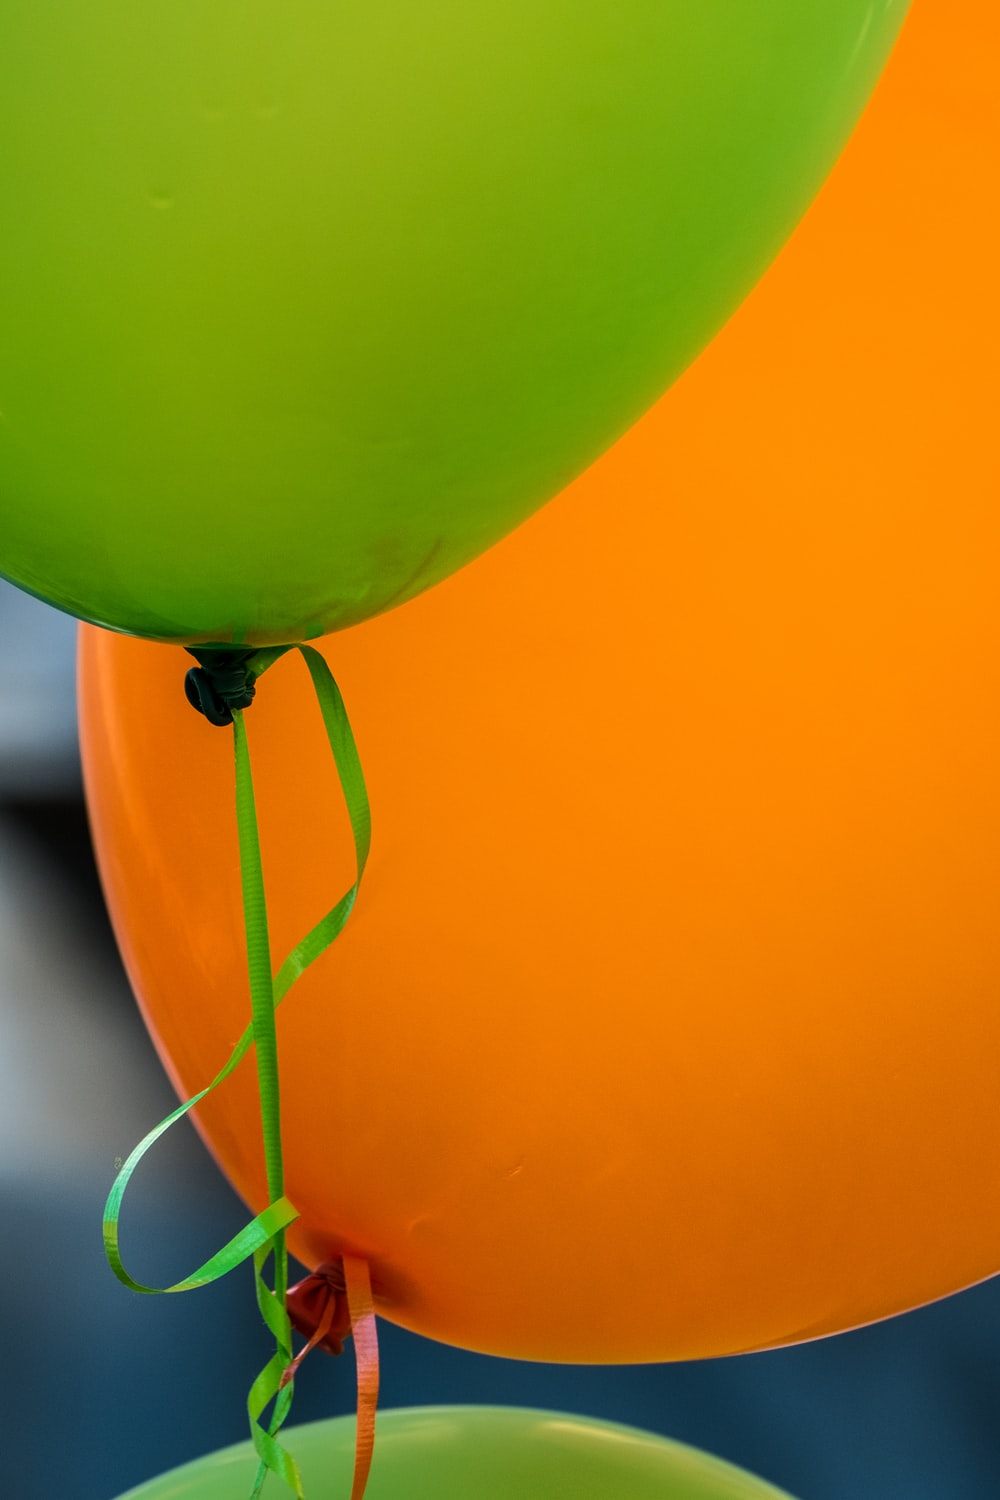 Green And Orange Picture. Download Free Image